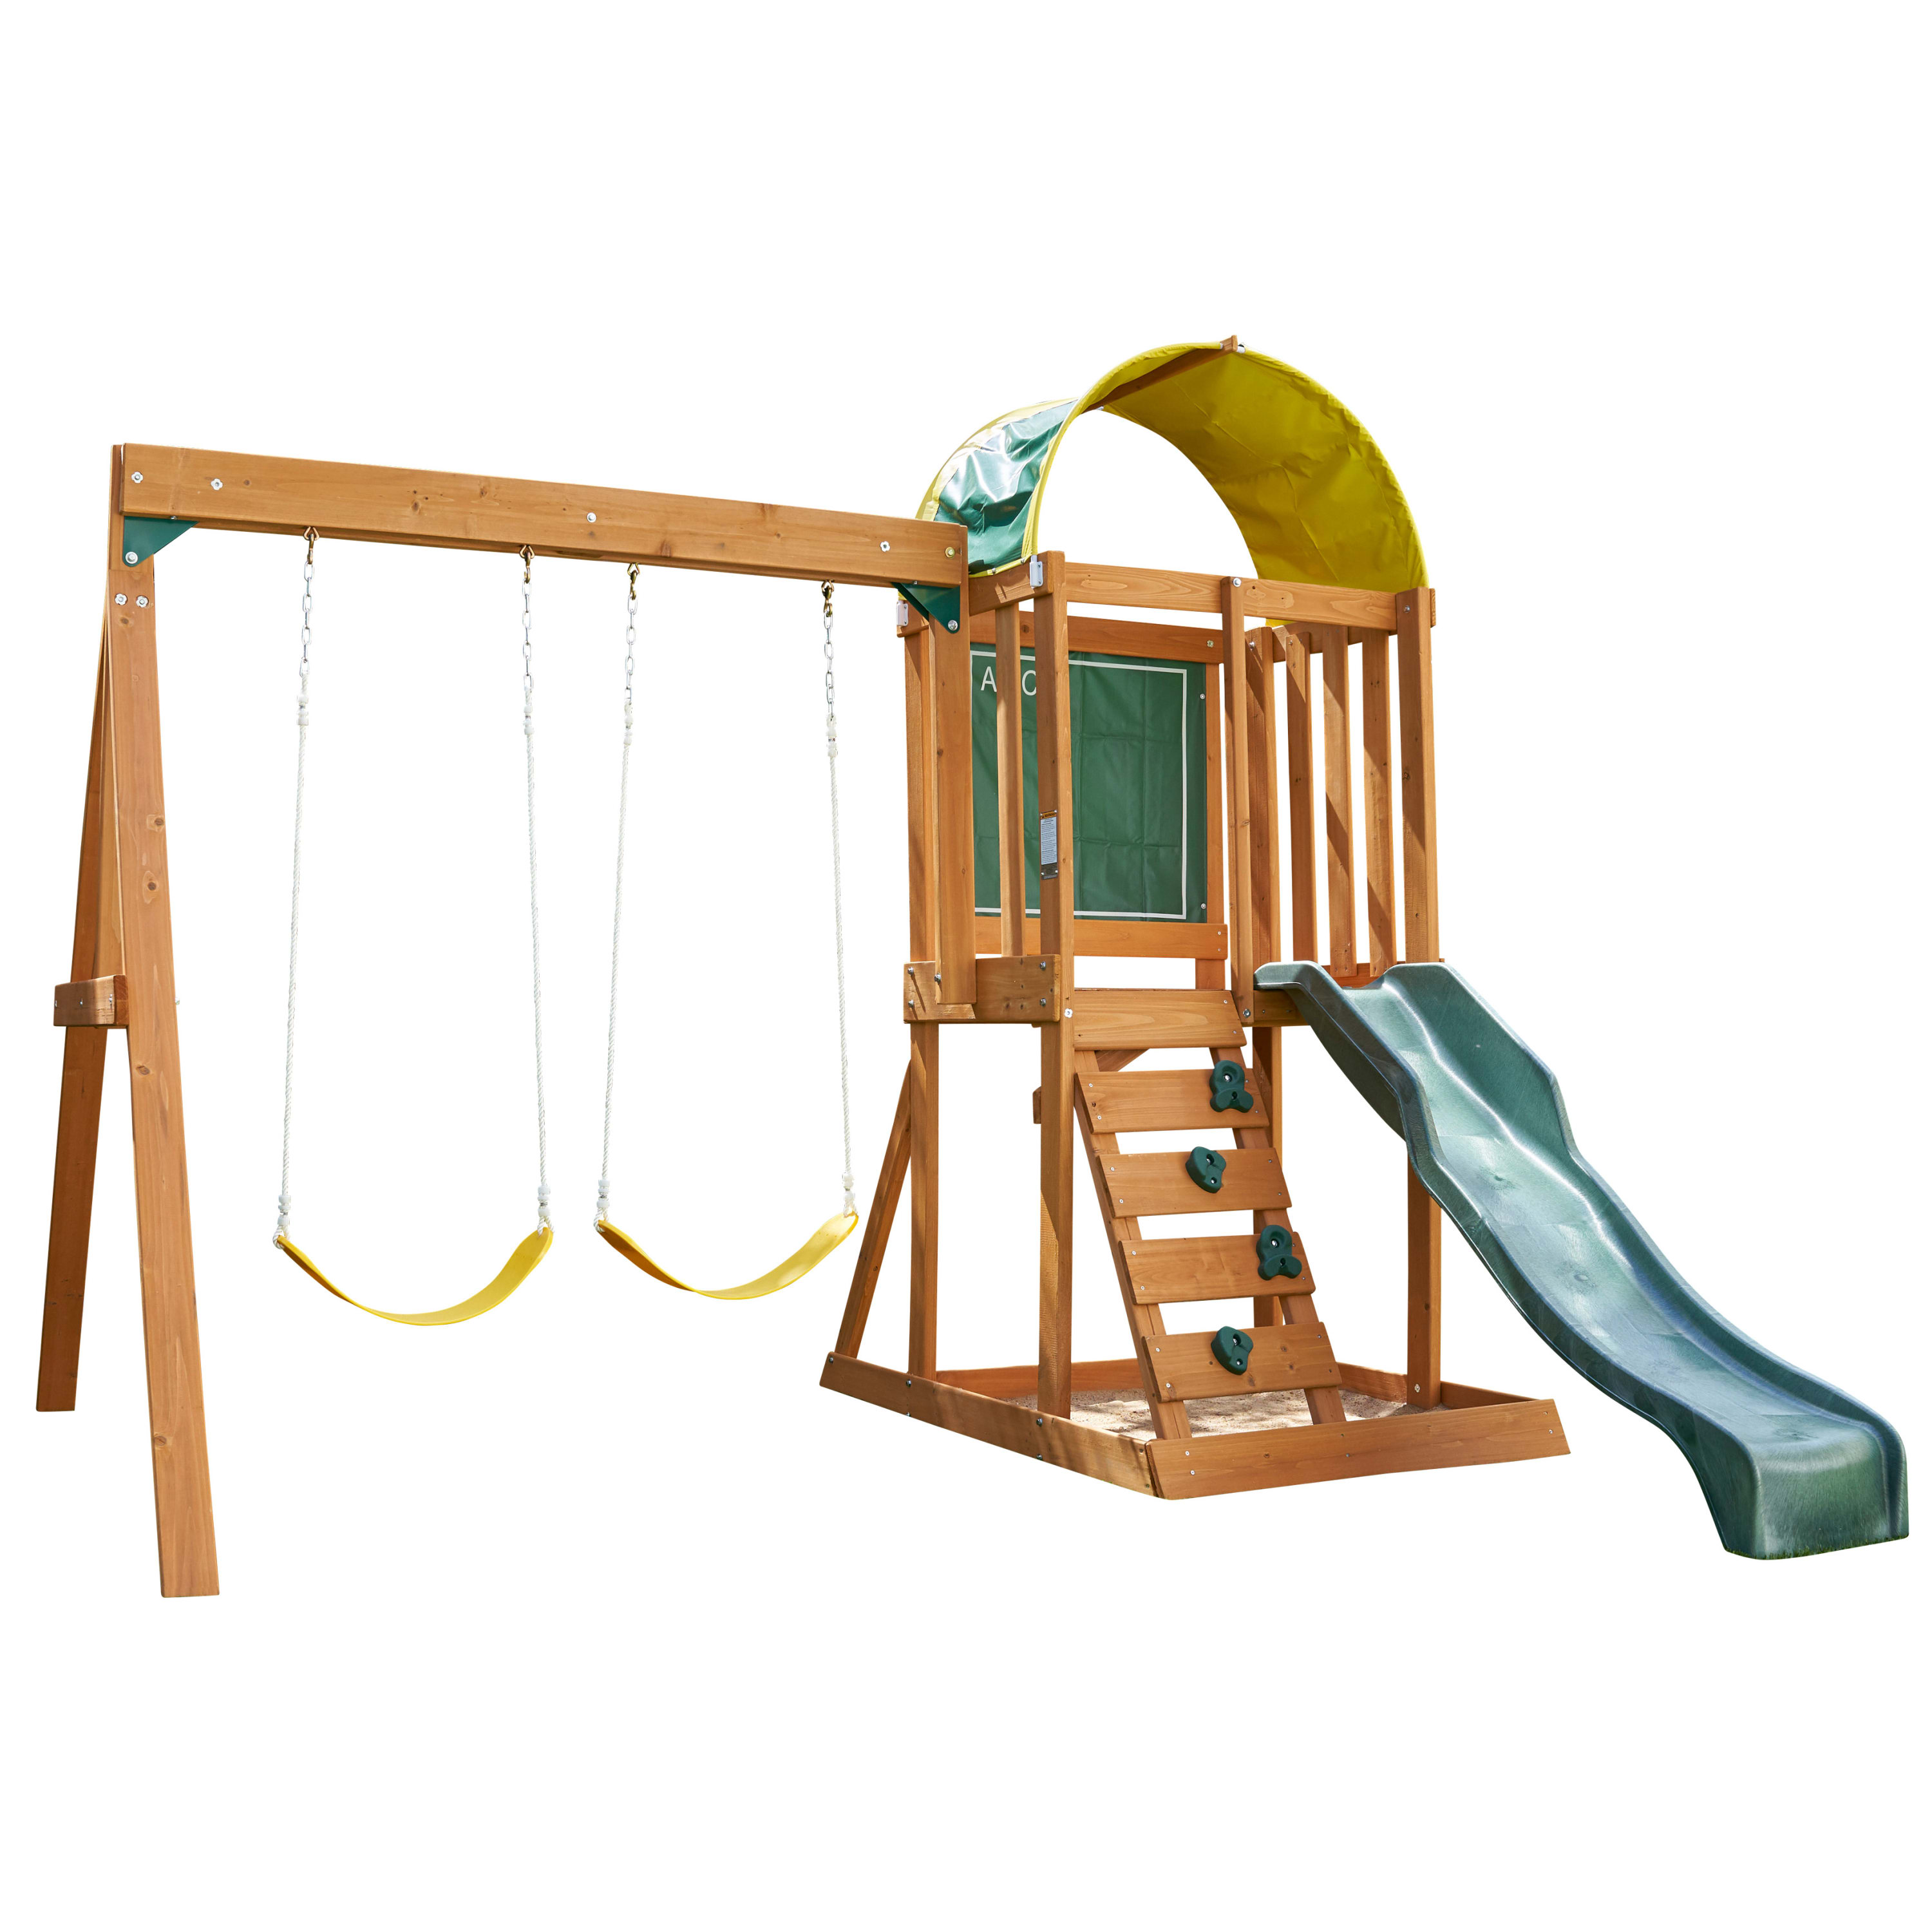 KidKraft Ainsley Wooden Outdoor Swing Set with Slide and Rock Wall - image 3 of 11